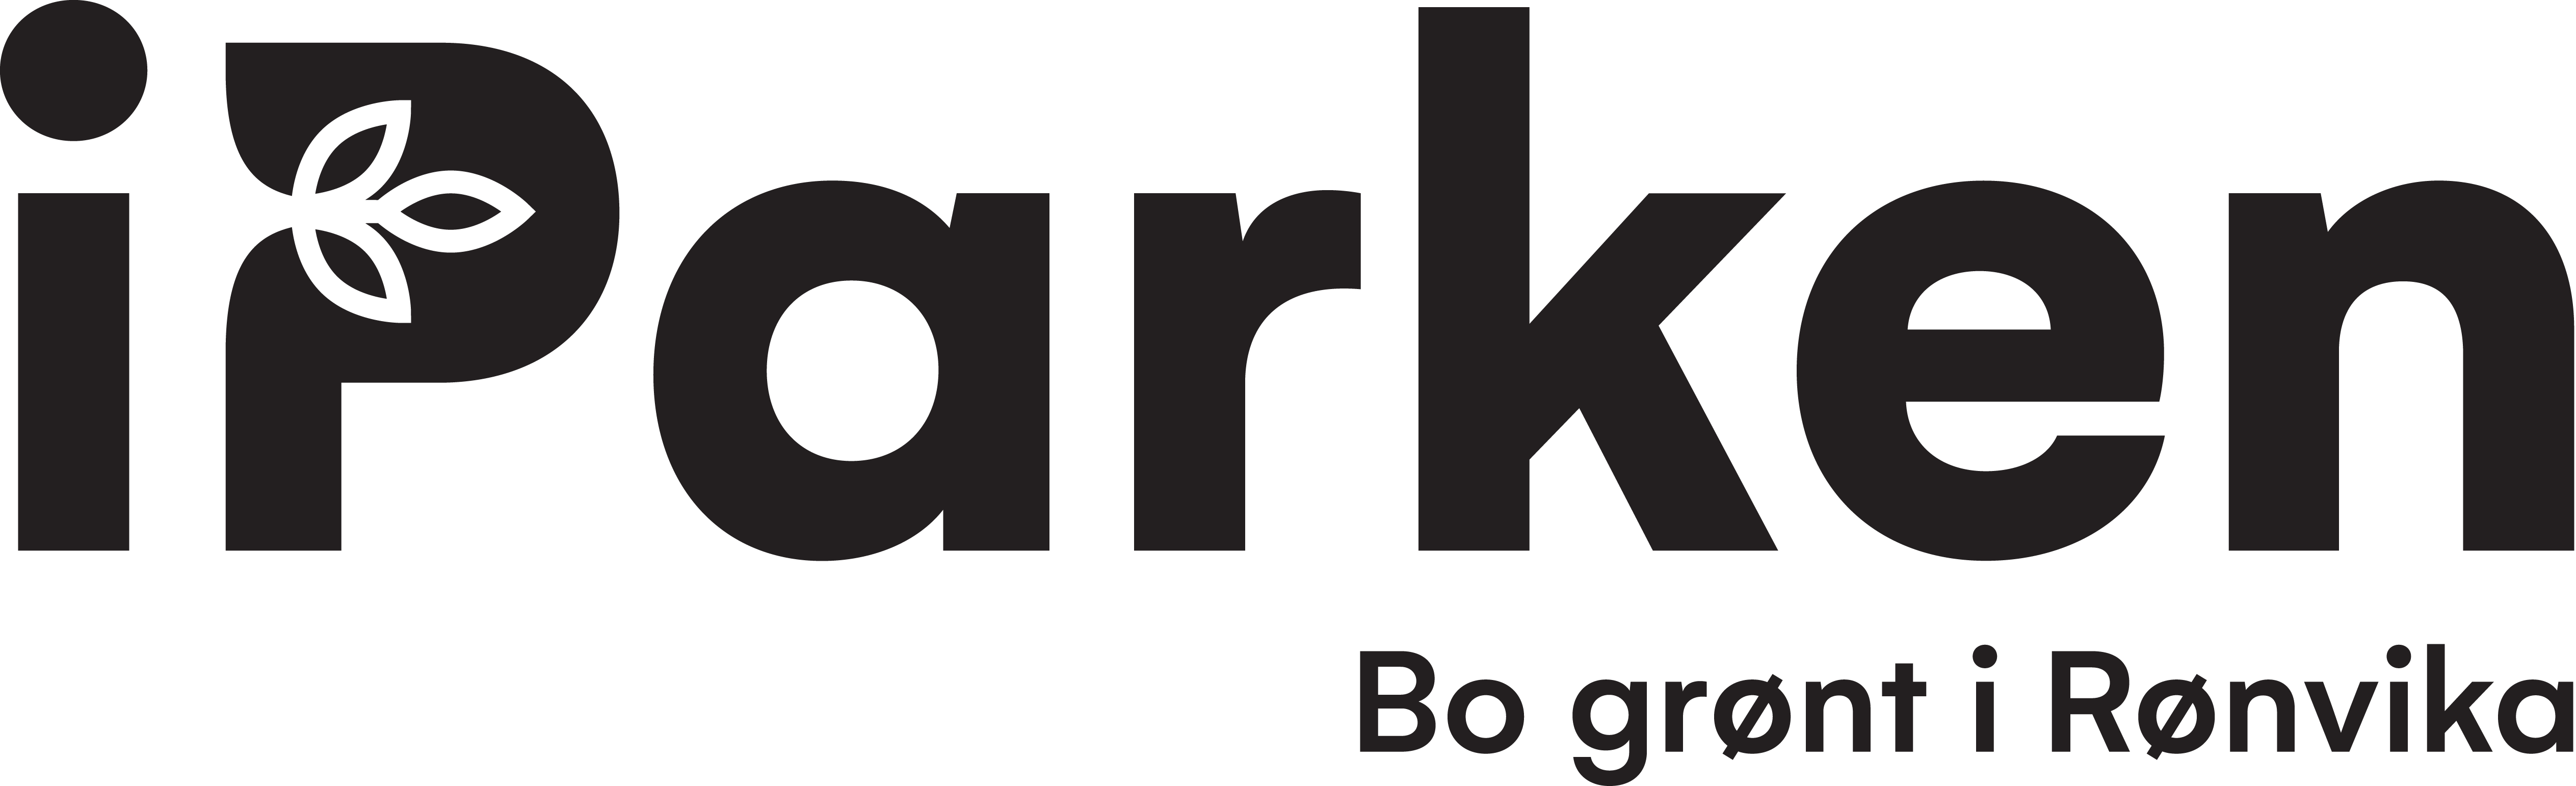 The logo for iParken.